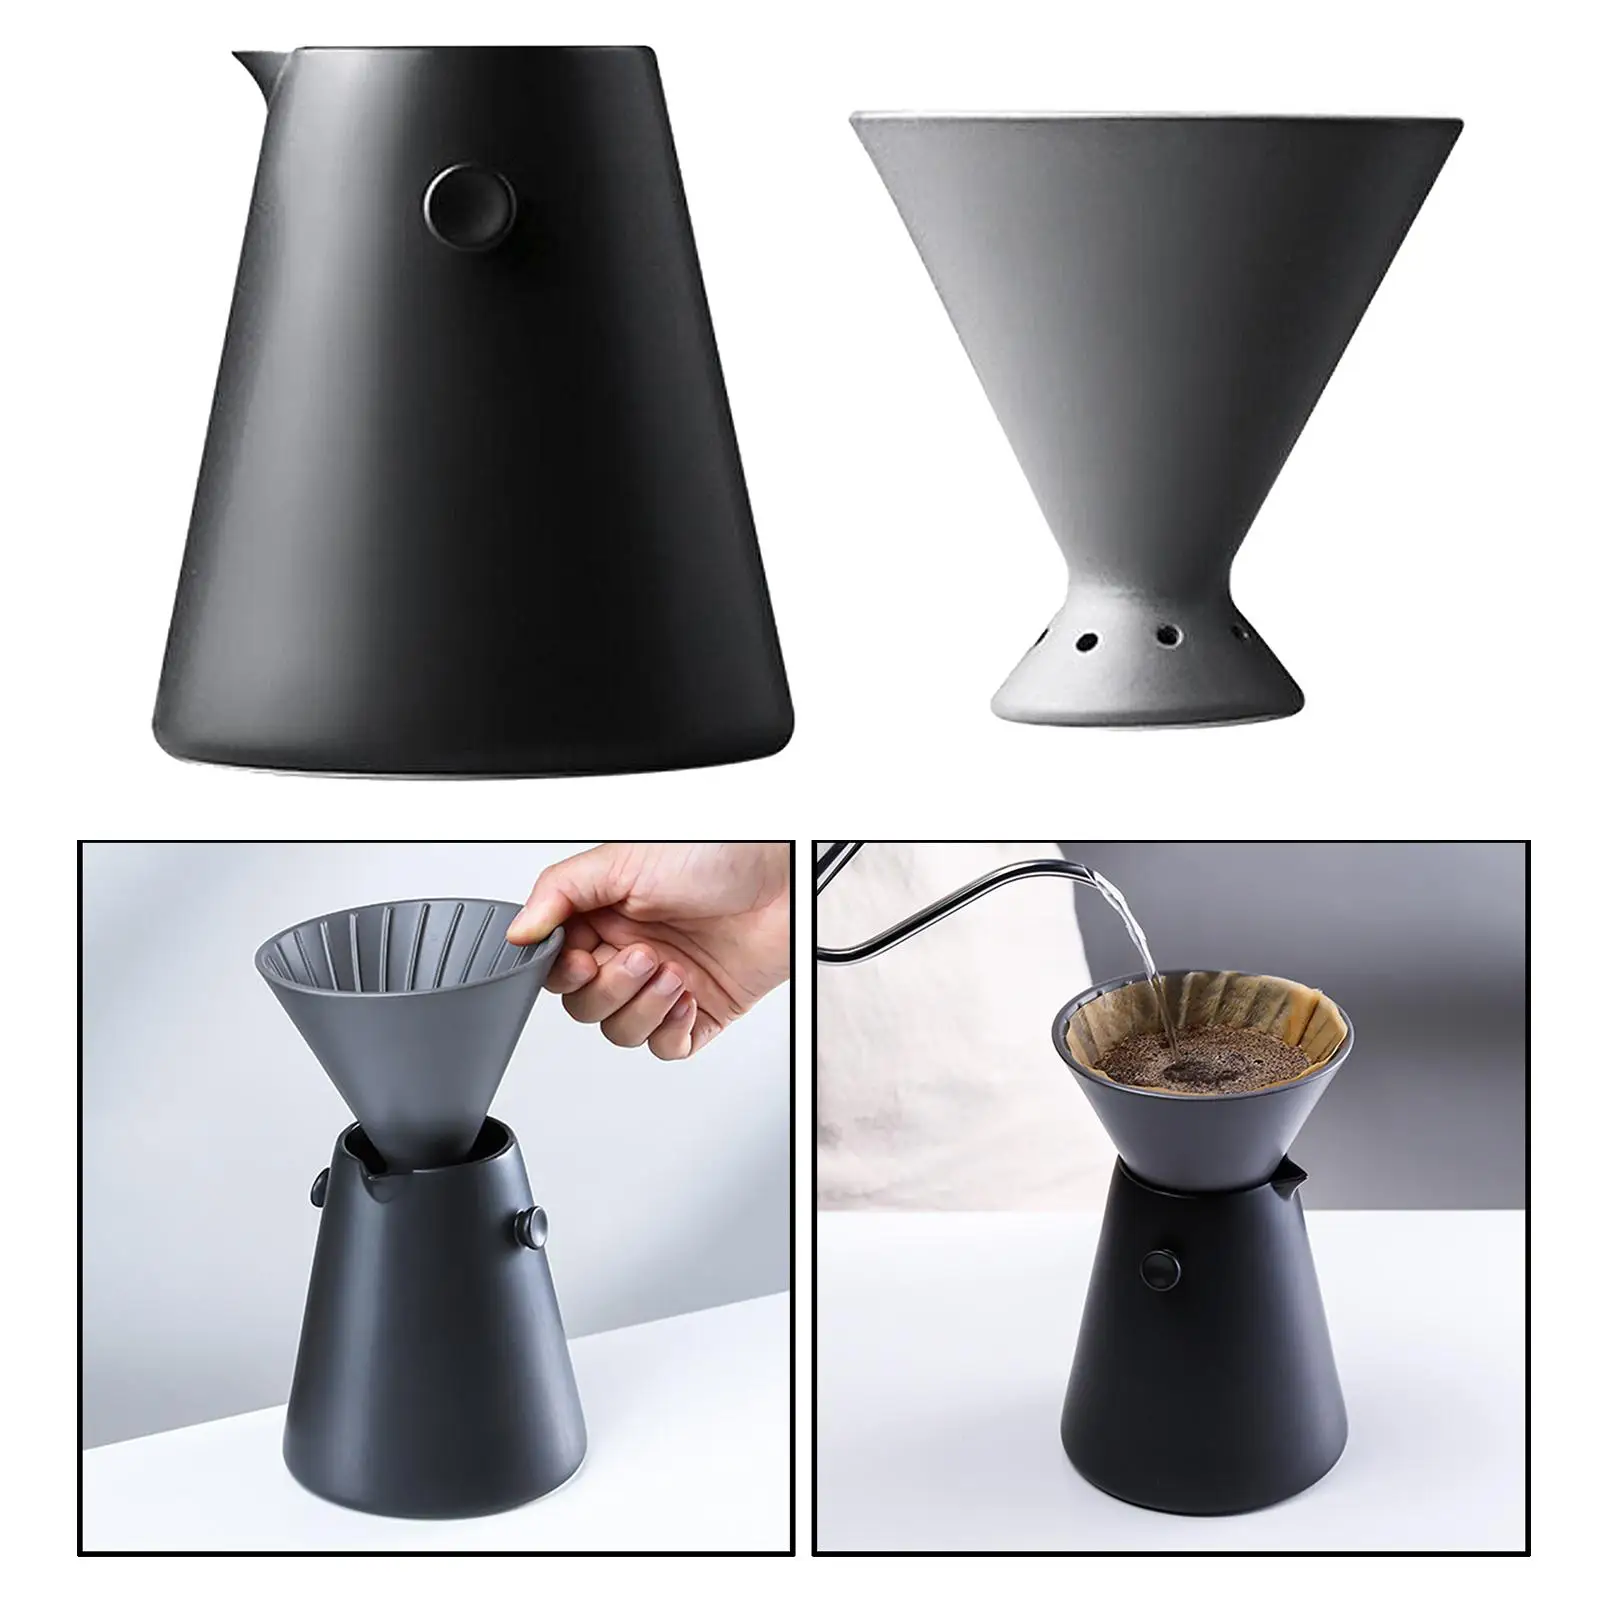 Household Hand Drip Coffee Pour Over Coffee Maker Anti-drip Water Storage Tank Design